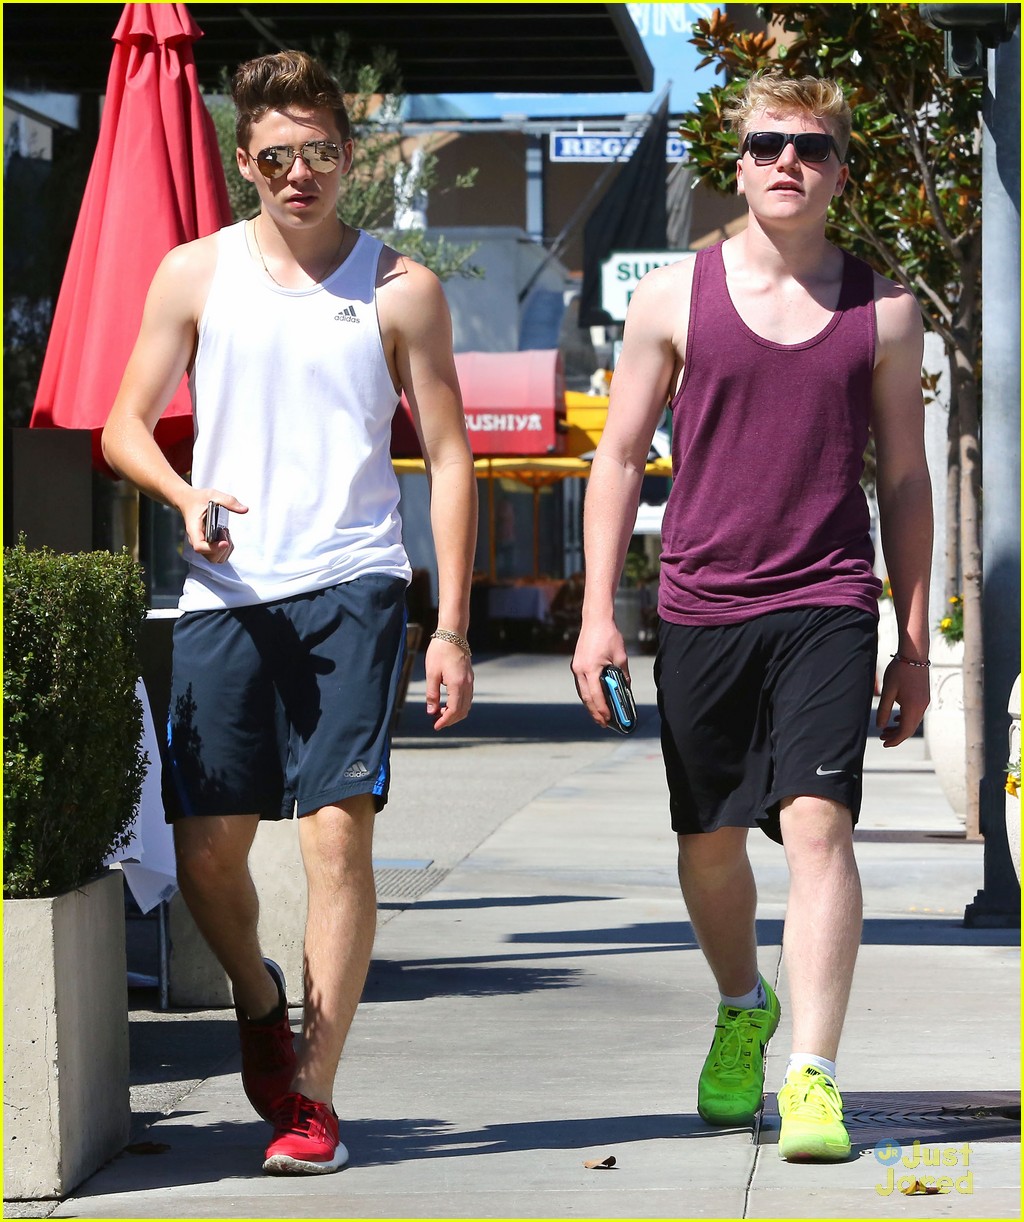 brooklyn beckham works out before willy wonka family time 10